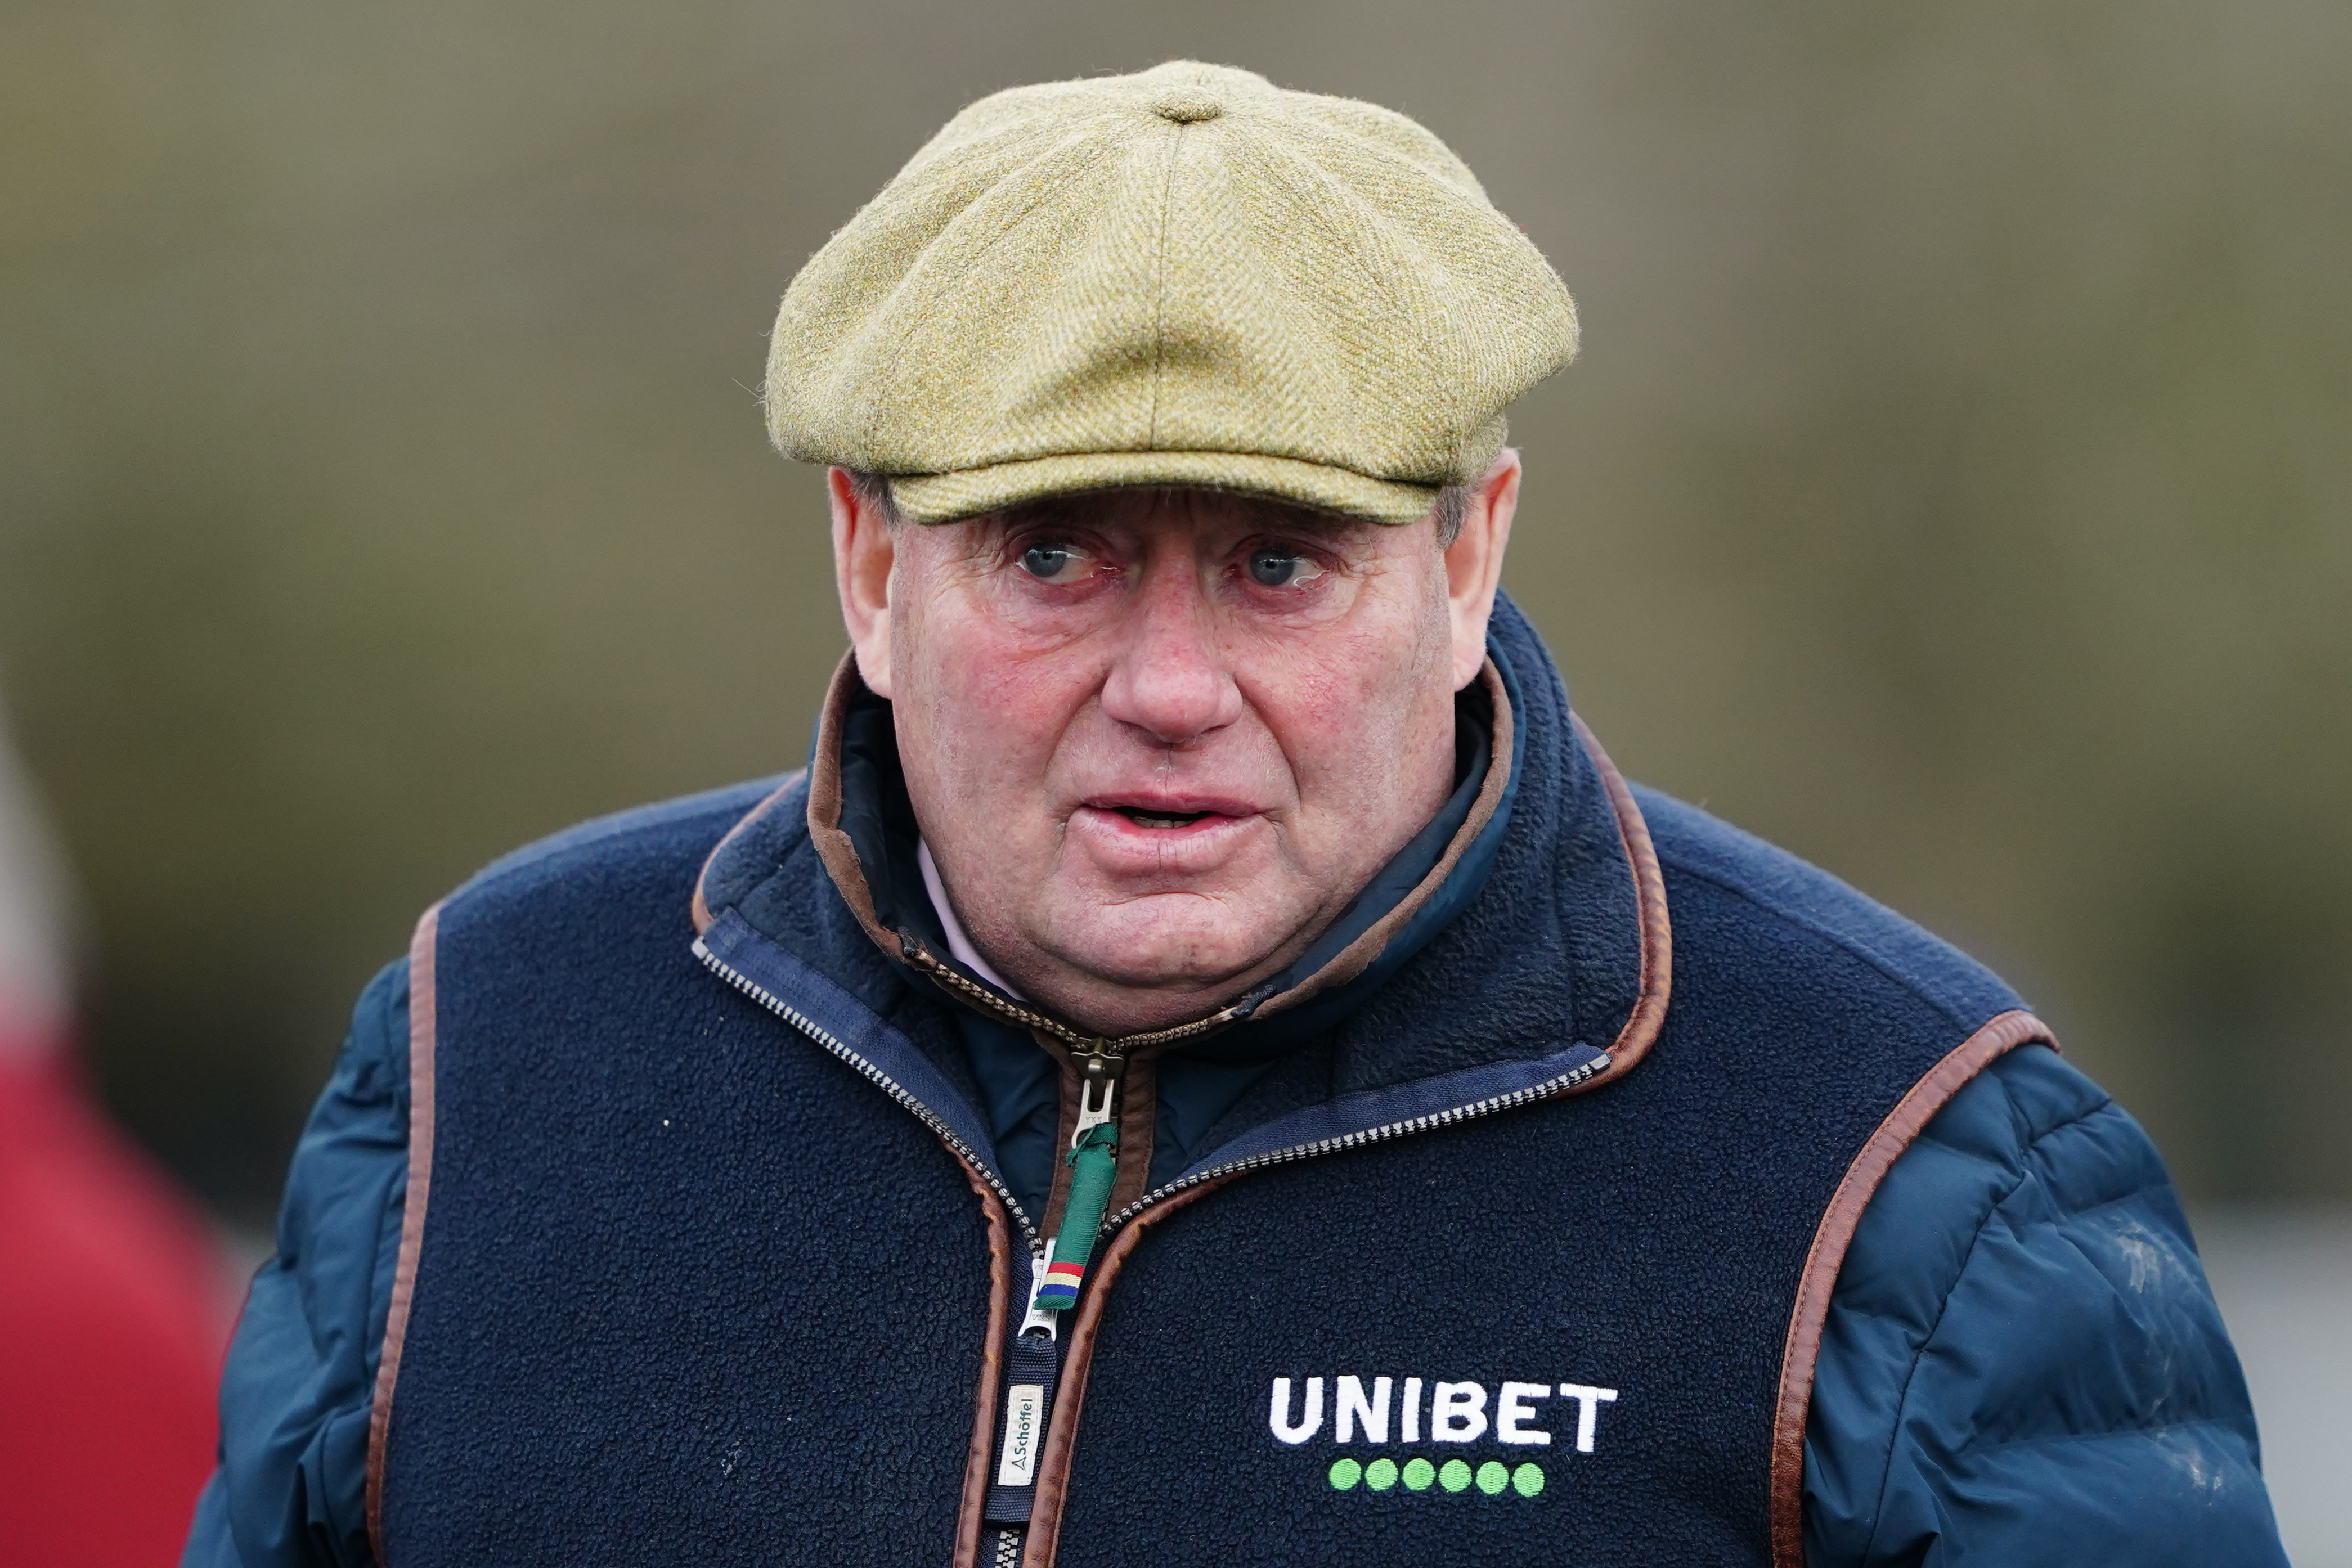 Nicky Henderson saddles three in the Close Brothers Mares' Hurdle at the Cheltenham Festival